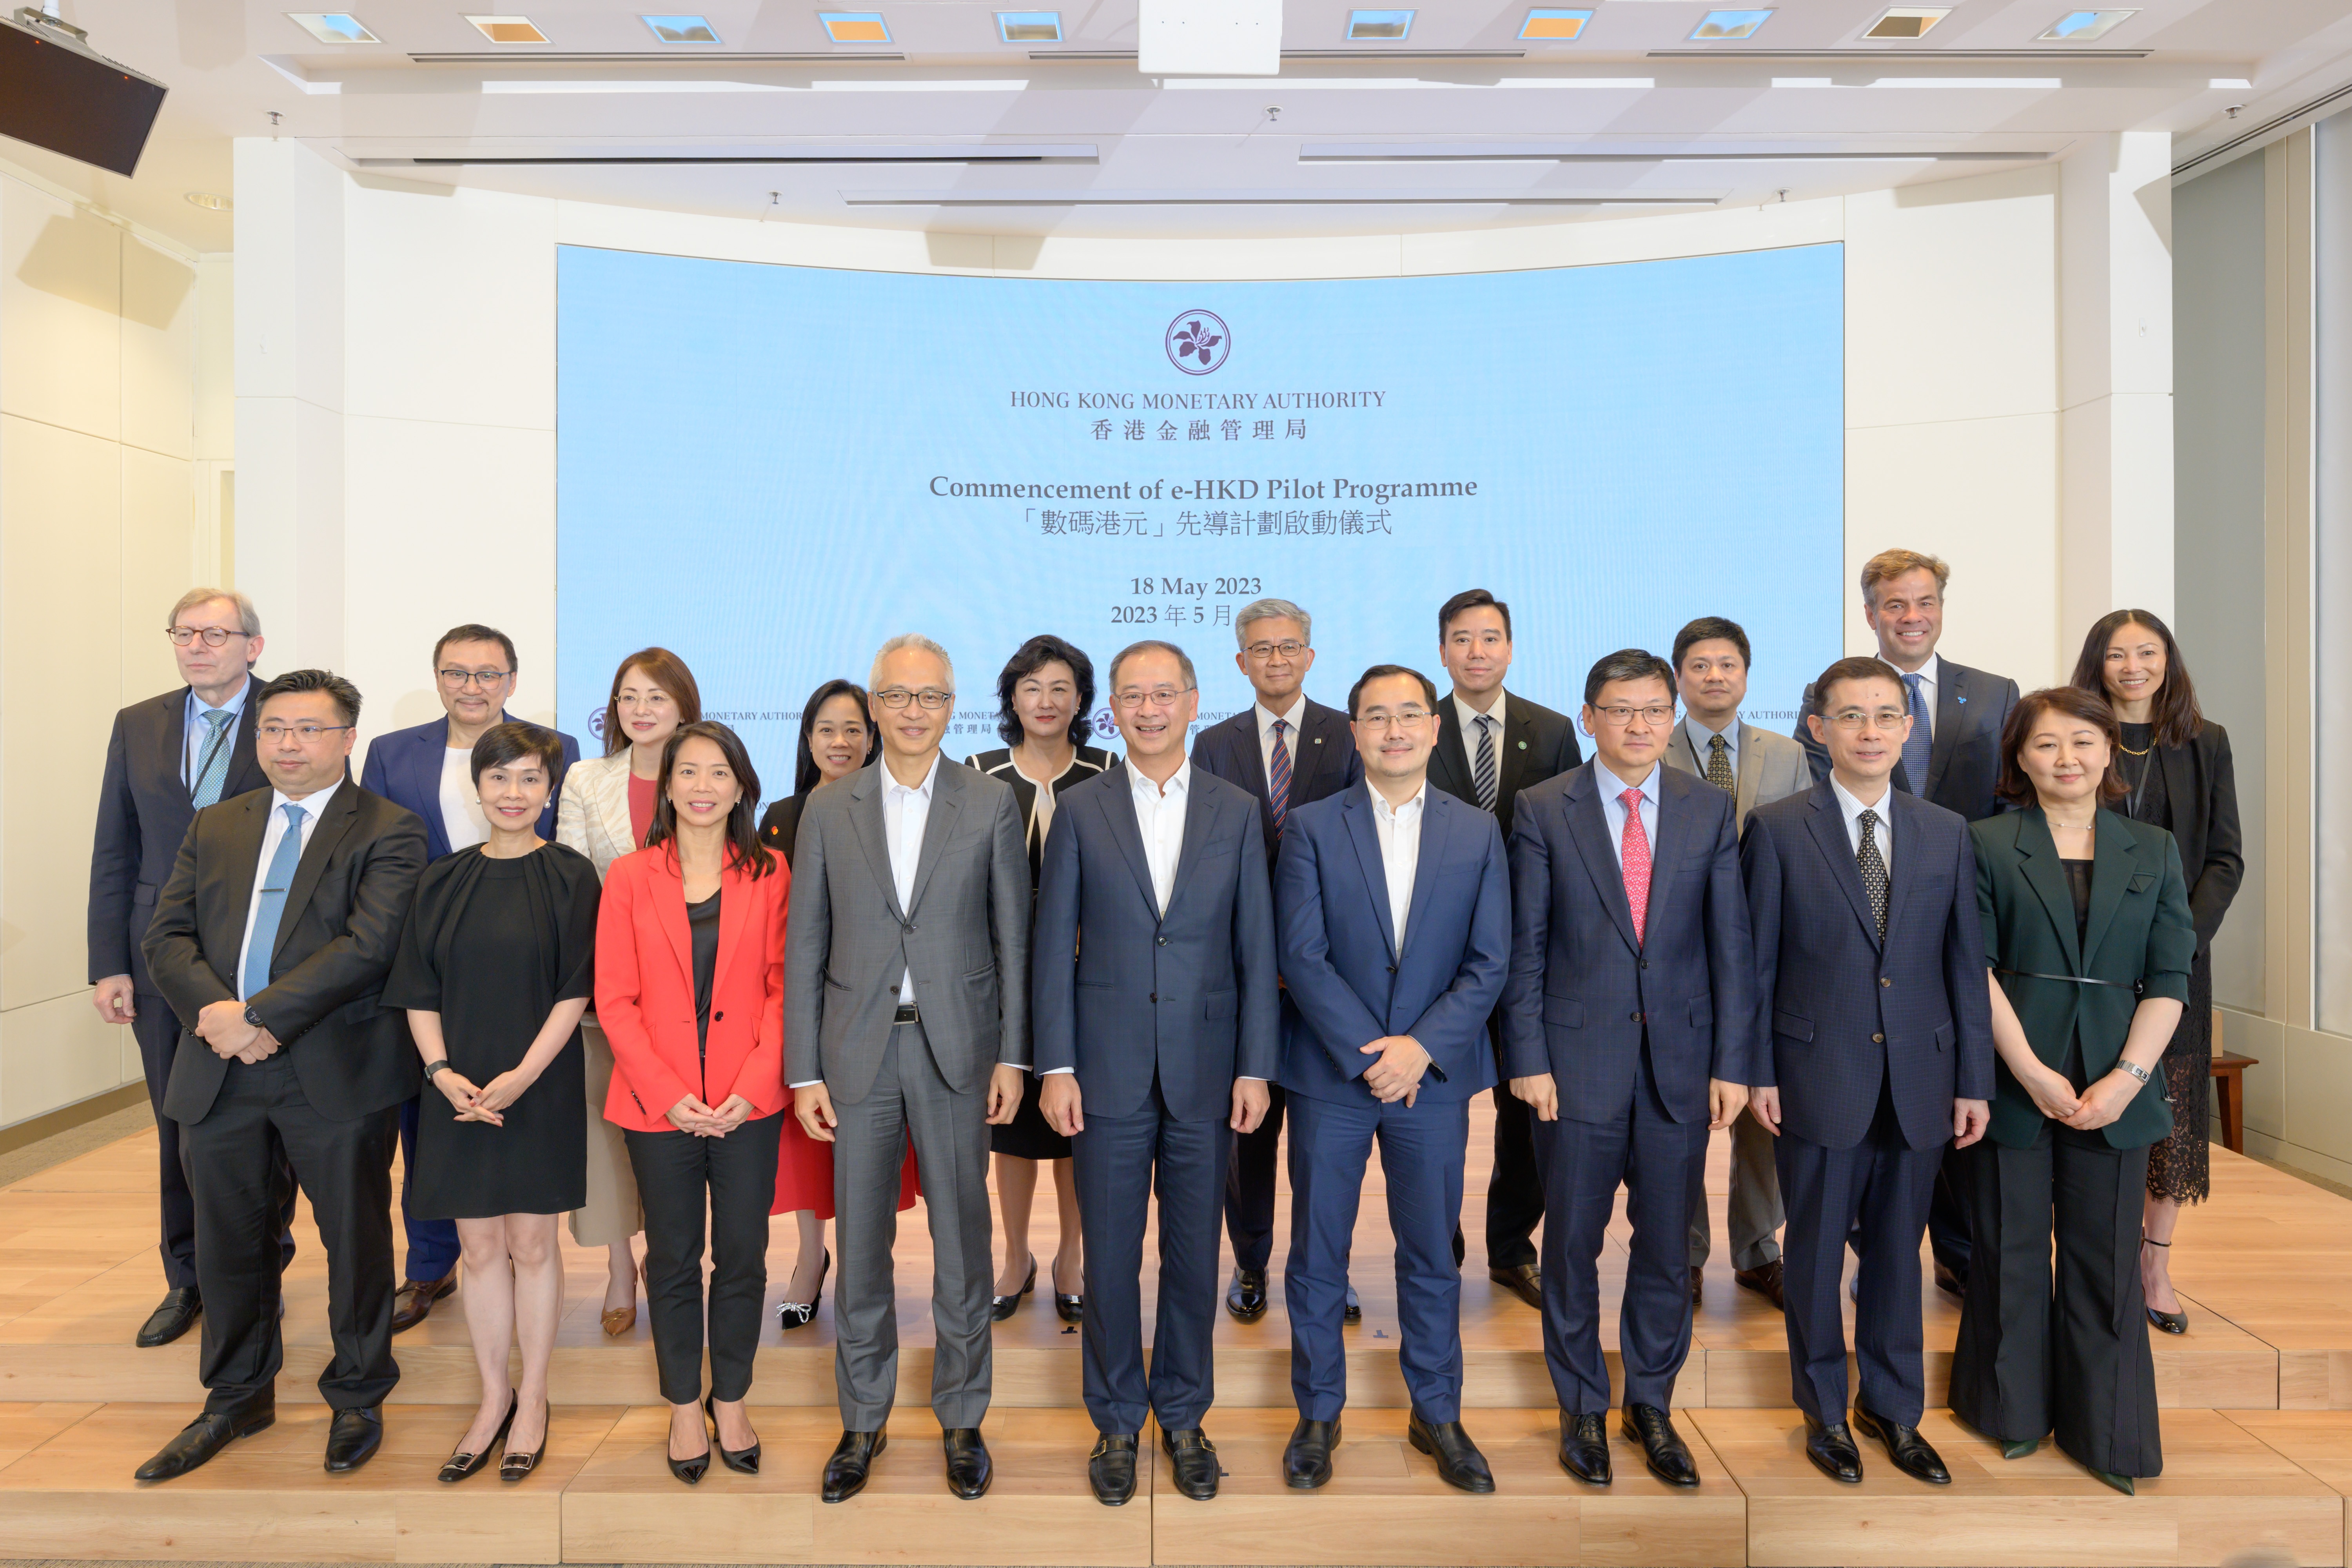 The HKMA hosts the commencement event of the e-HKD Pilot Programme. Joining the event are senior executives of the 16 selected pilot firms from the financial, payment and technology sectors.